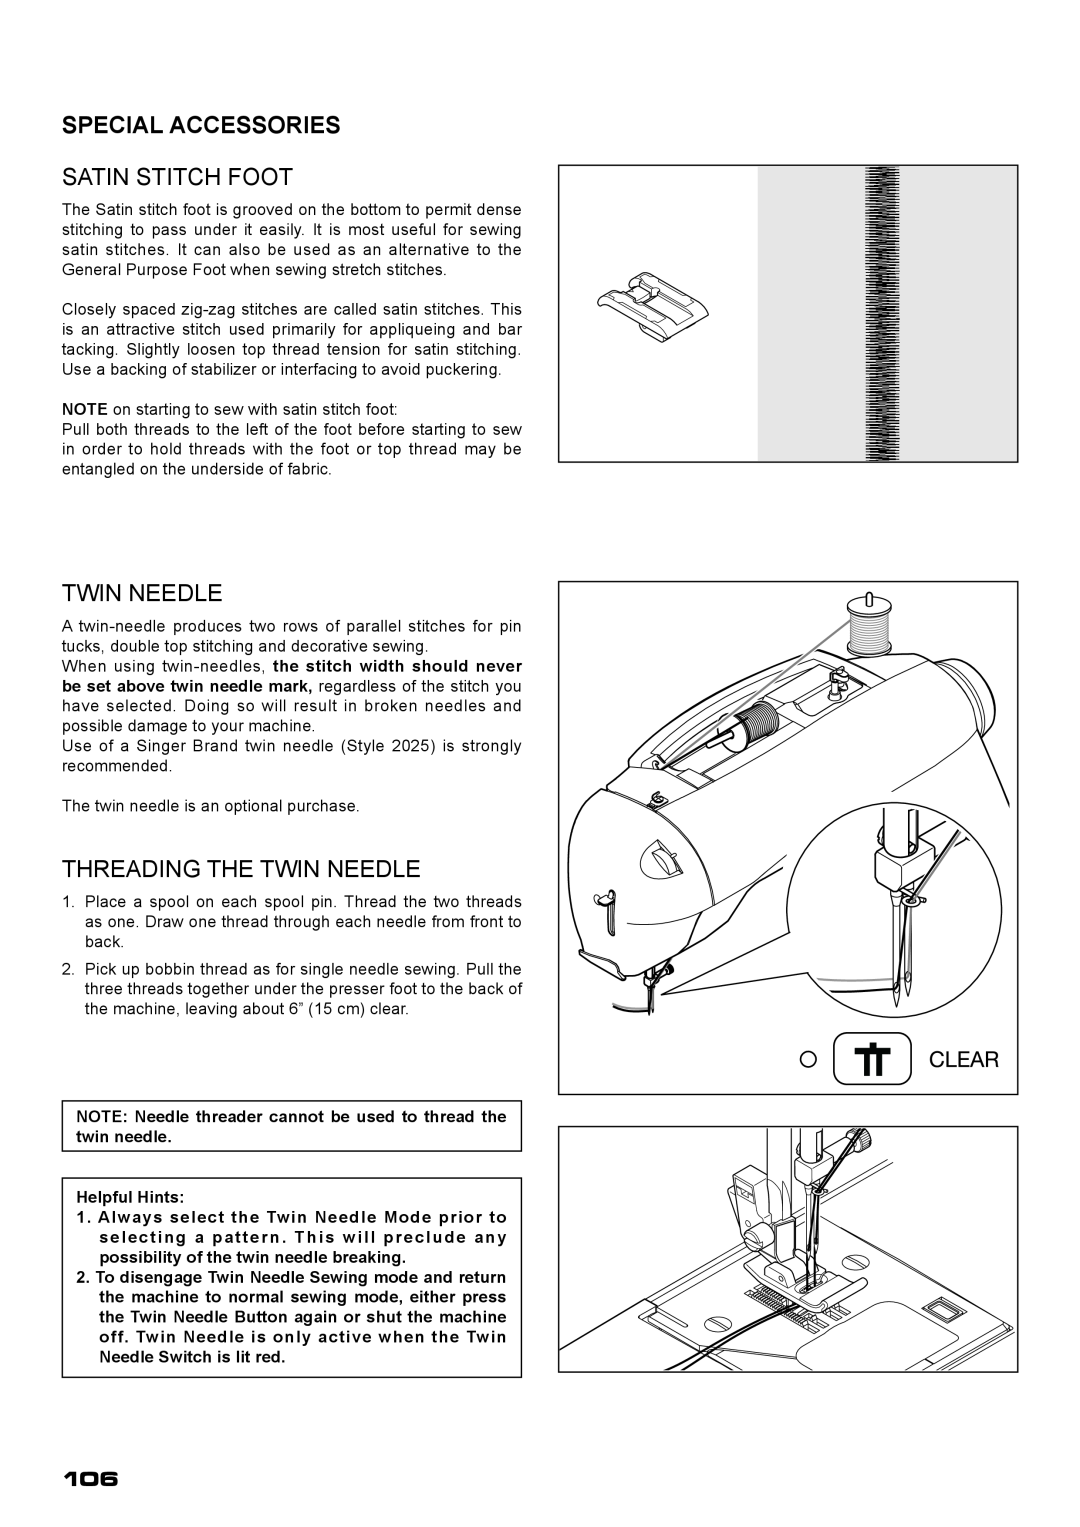 Singer XL-400 instruction manual Special Accessories, Satin Stitch Foot, Threading The Twin Needle 